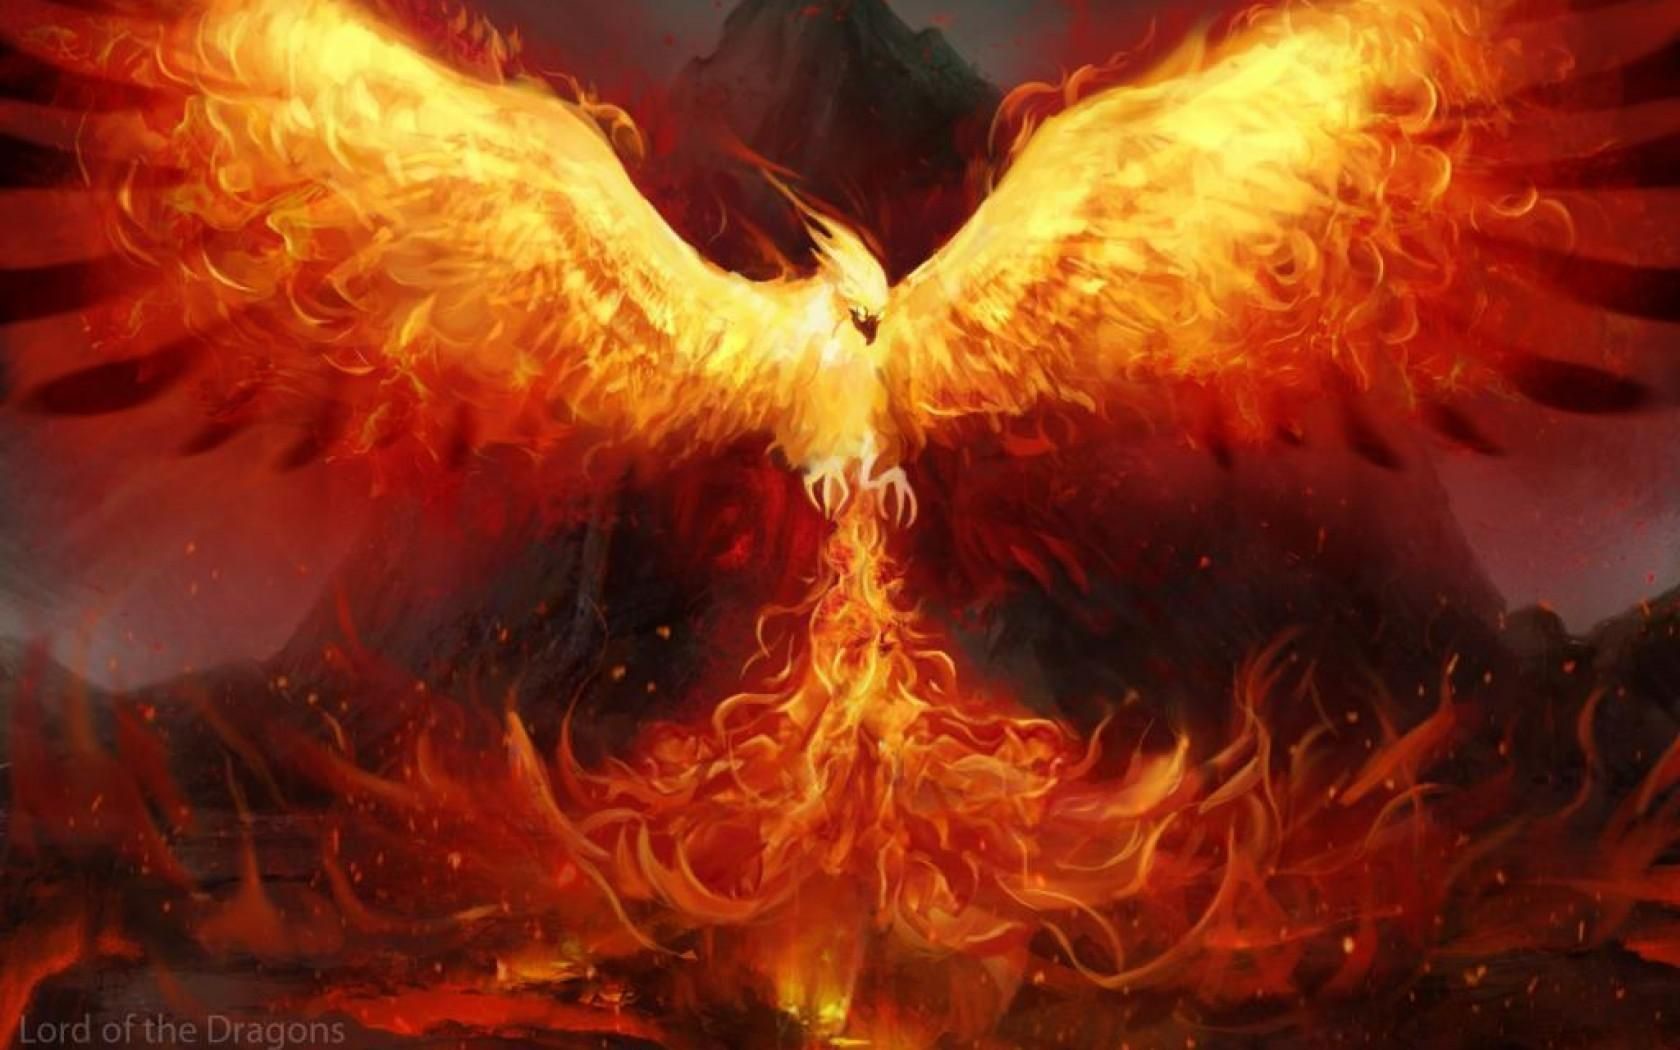 Rising from The Ashes Like “The Phoenix”